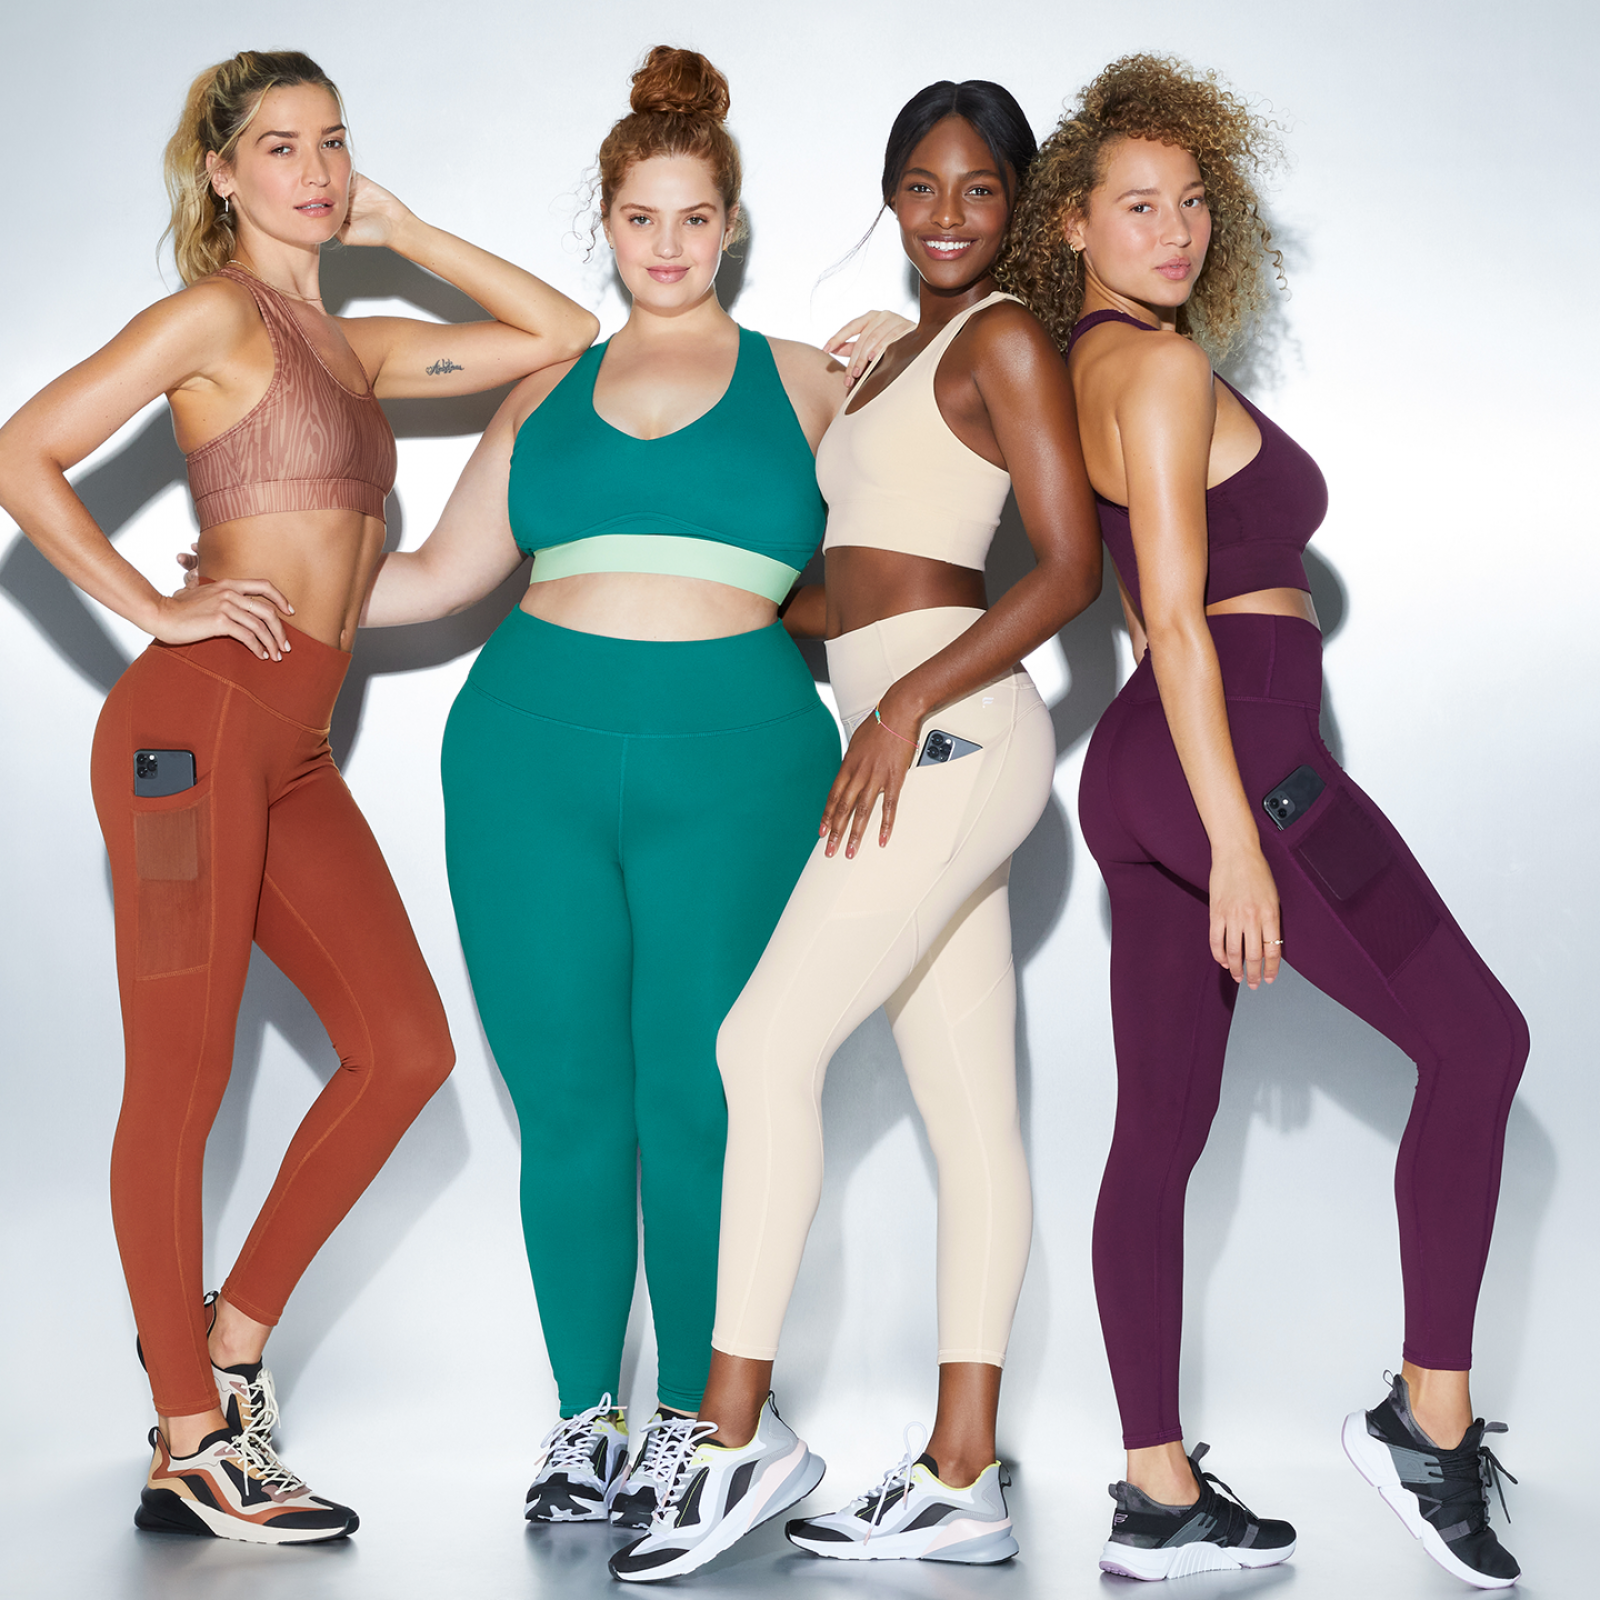 15 Workout Outfits from Fabletics That Make Getting Fit Look Good